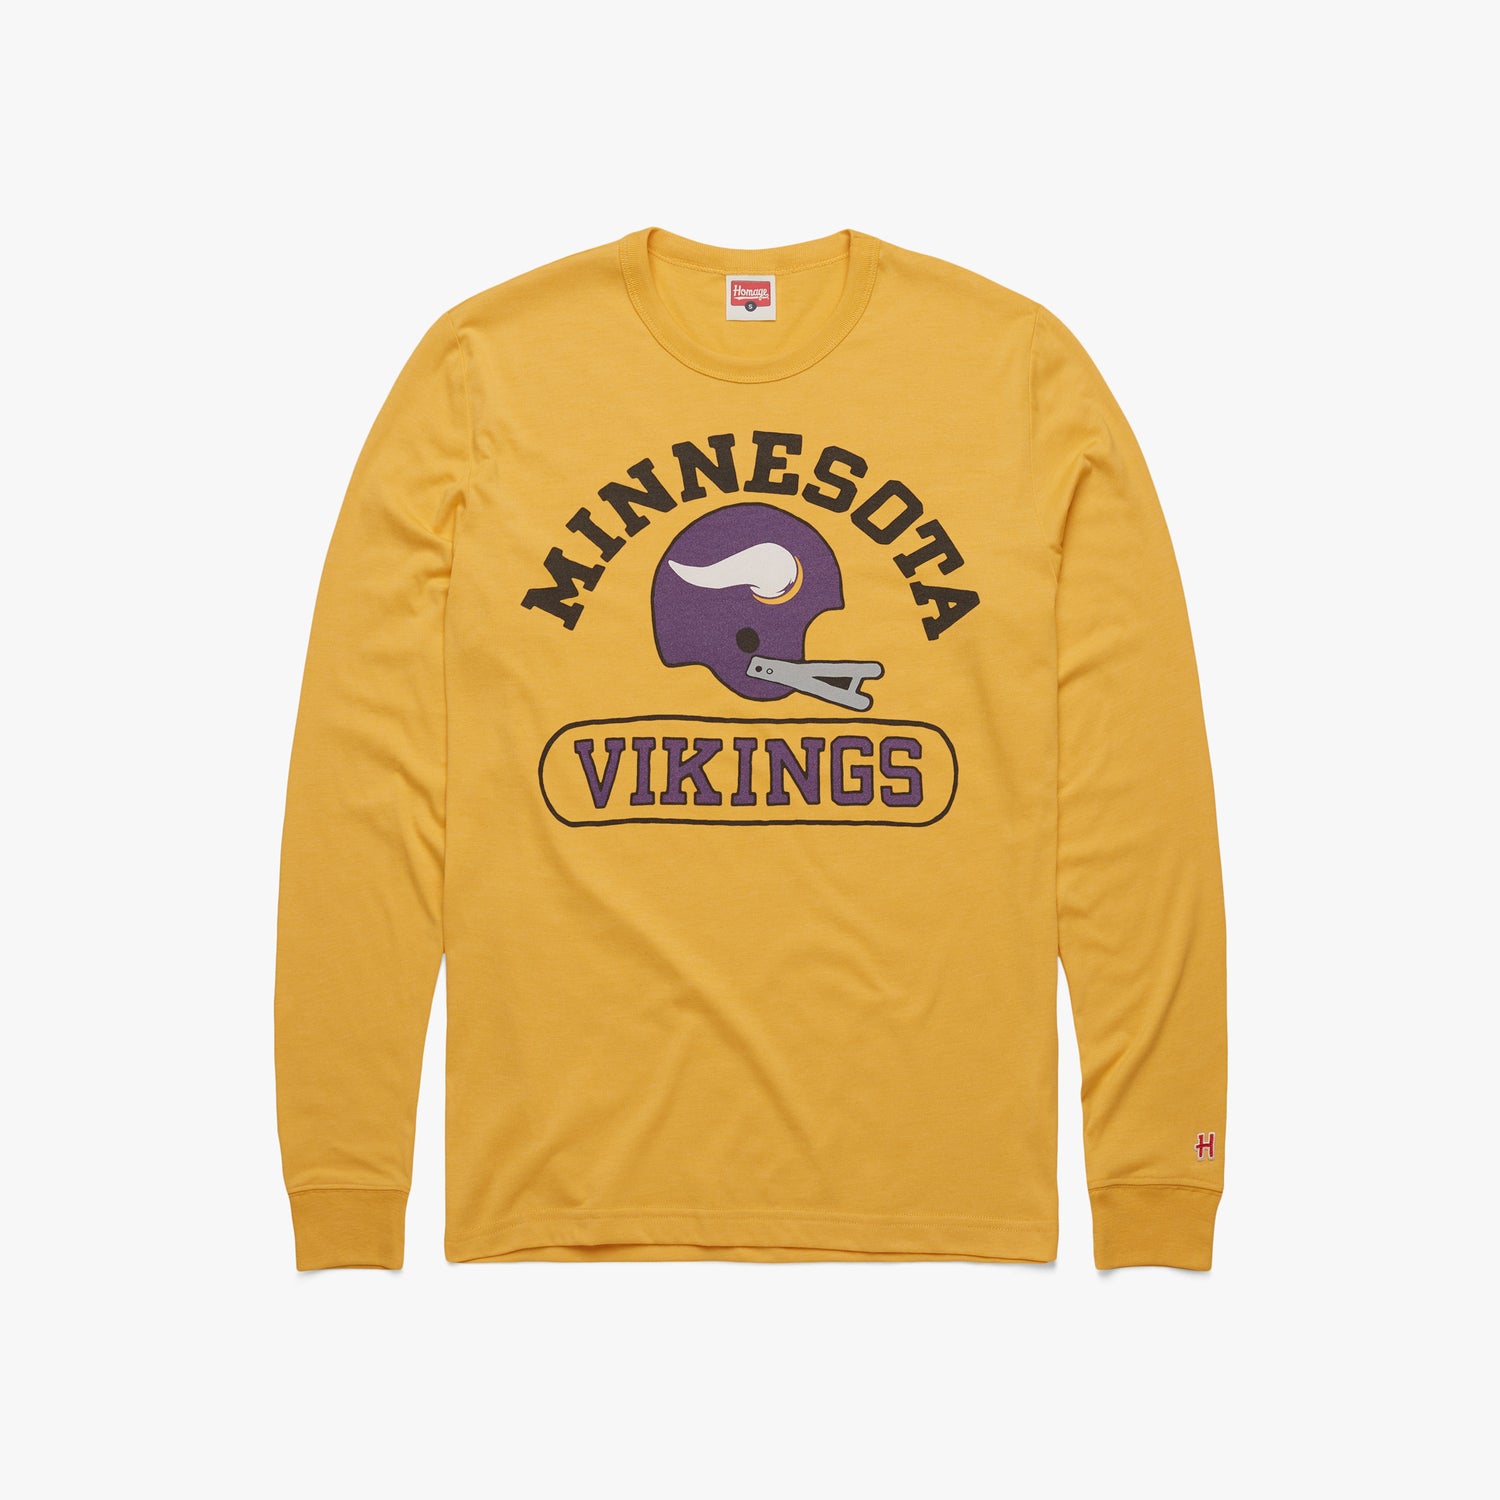 Minnesota Vikings Throwback Helmet Long Sleeve Tee T-Shirt from Homage. | Officially Licensed Vintage NFL Apparel from Homage Pro Shop.